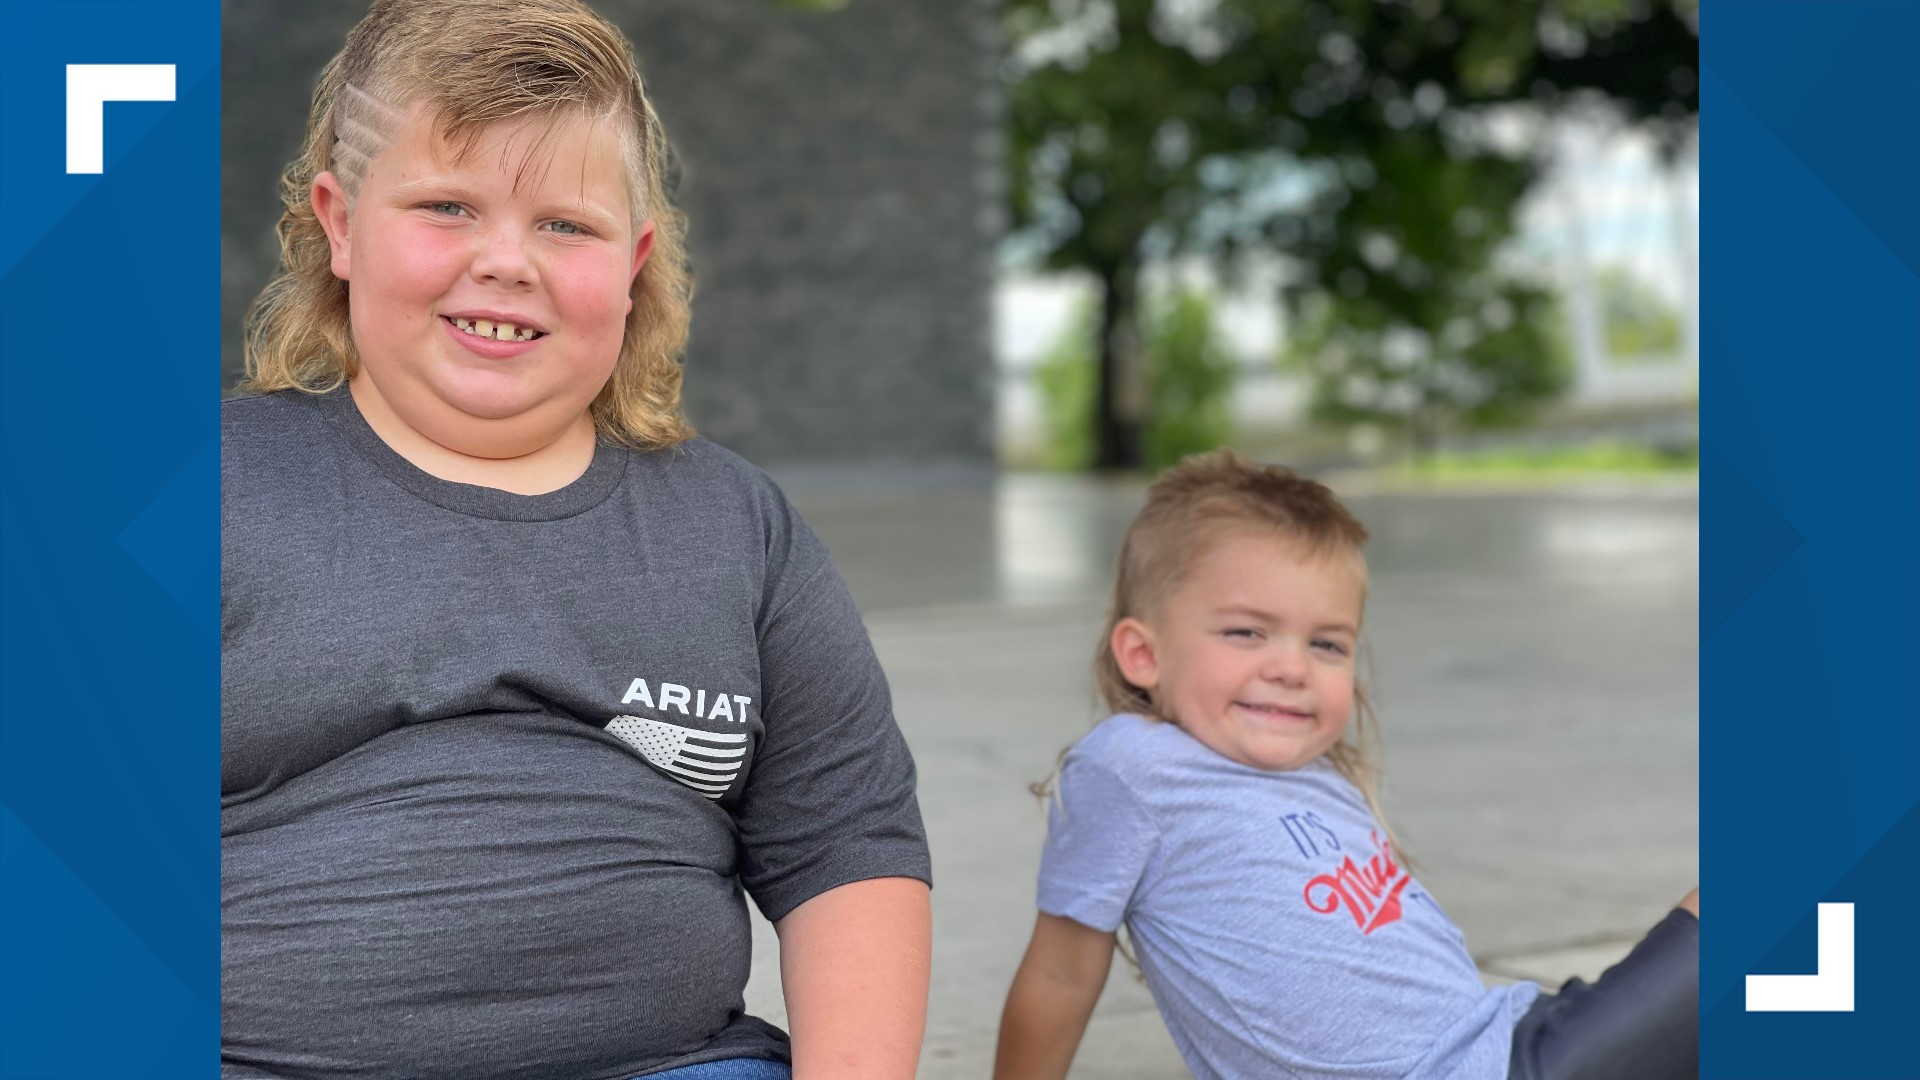 It’s made a comeback the last couple years. Now, two central Ohio boys are in the running to be crowned the USA’s best mullet.